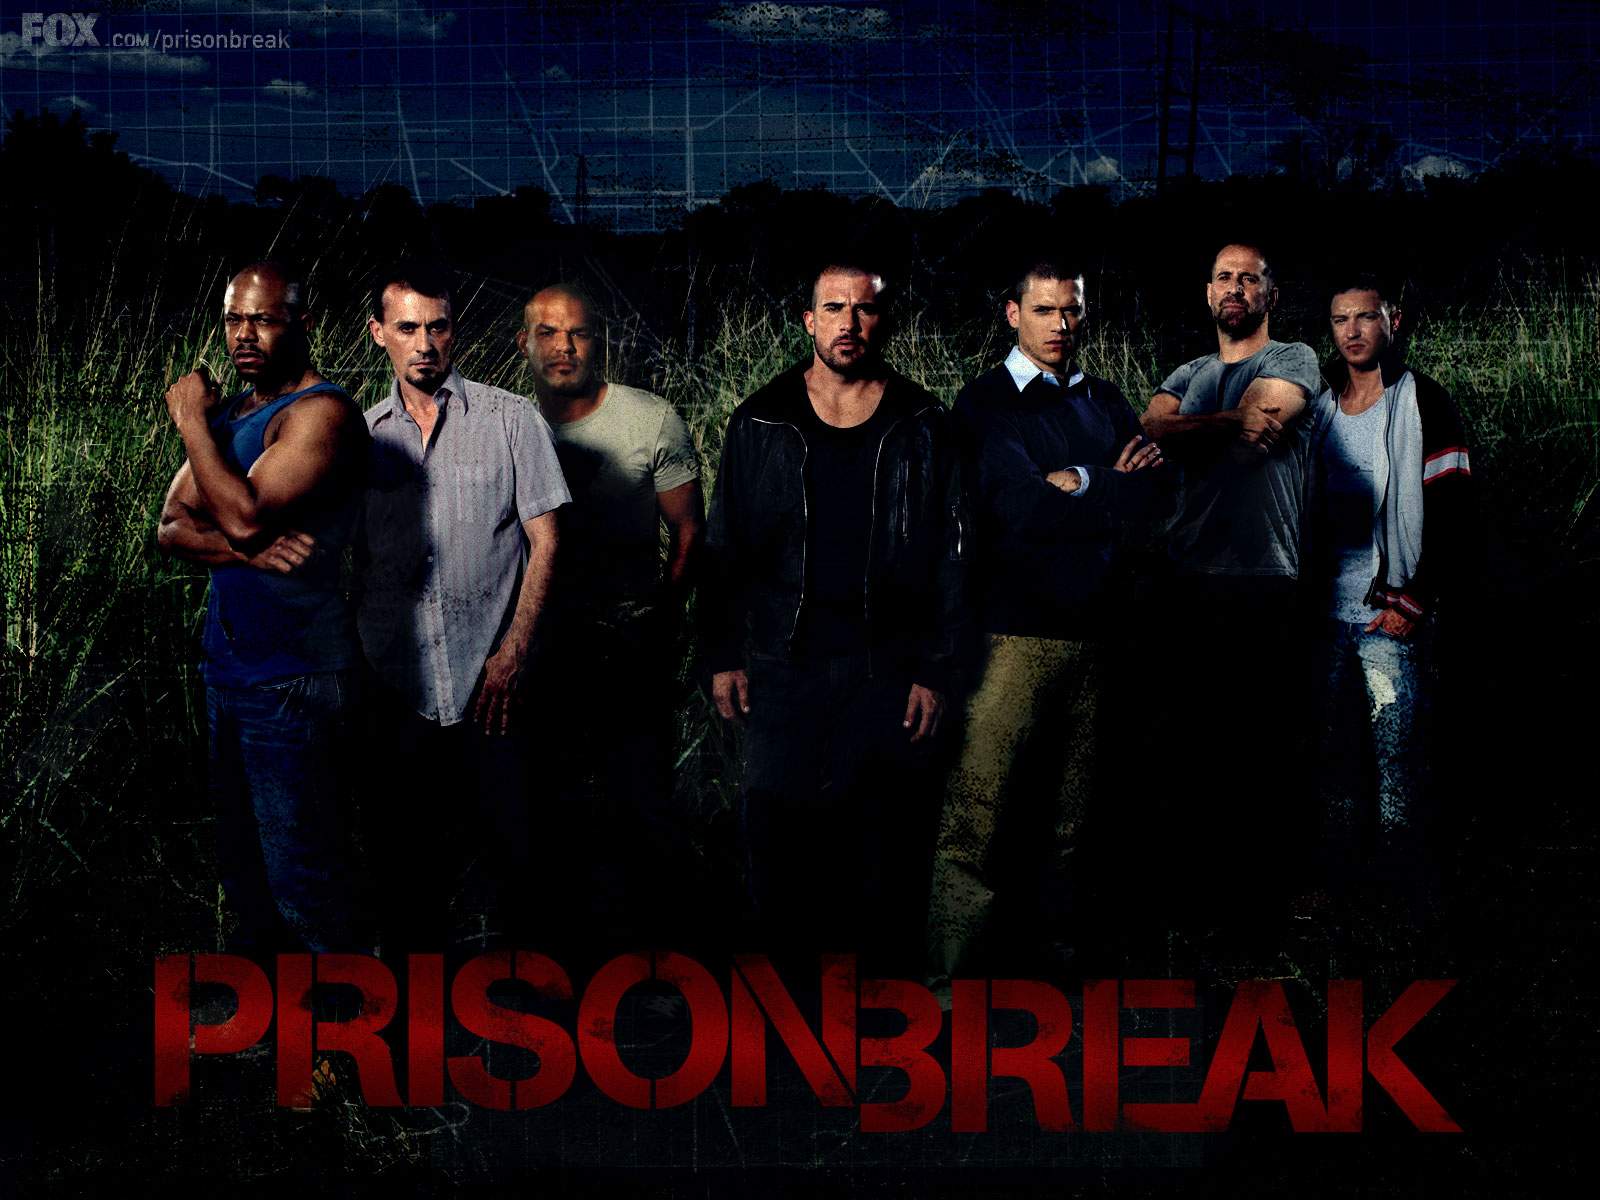 Download Full HD Wallpapers absolutely free for your pc desktop, laptop and mobile devices. Prison Break Wallpaper